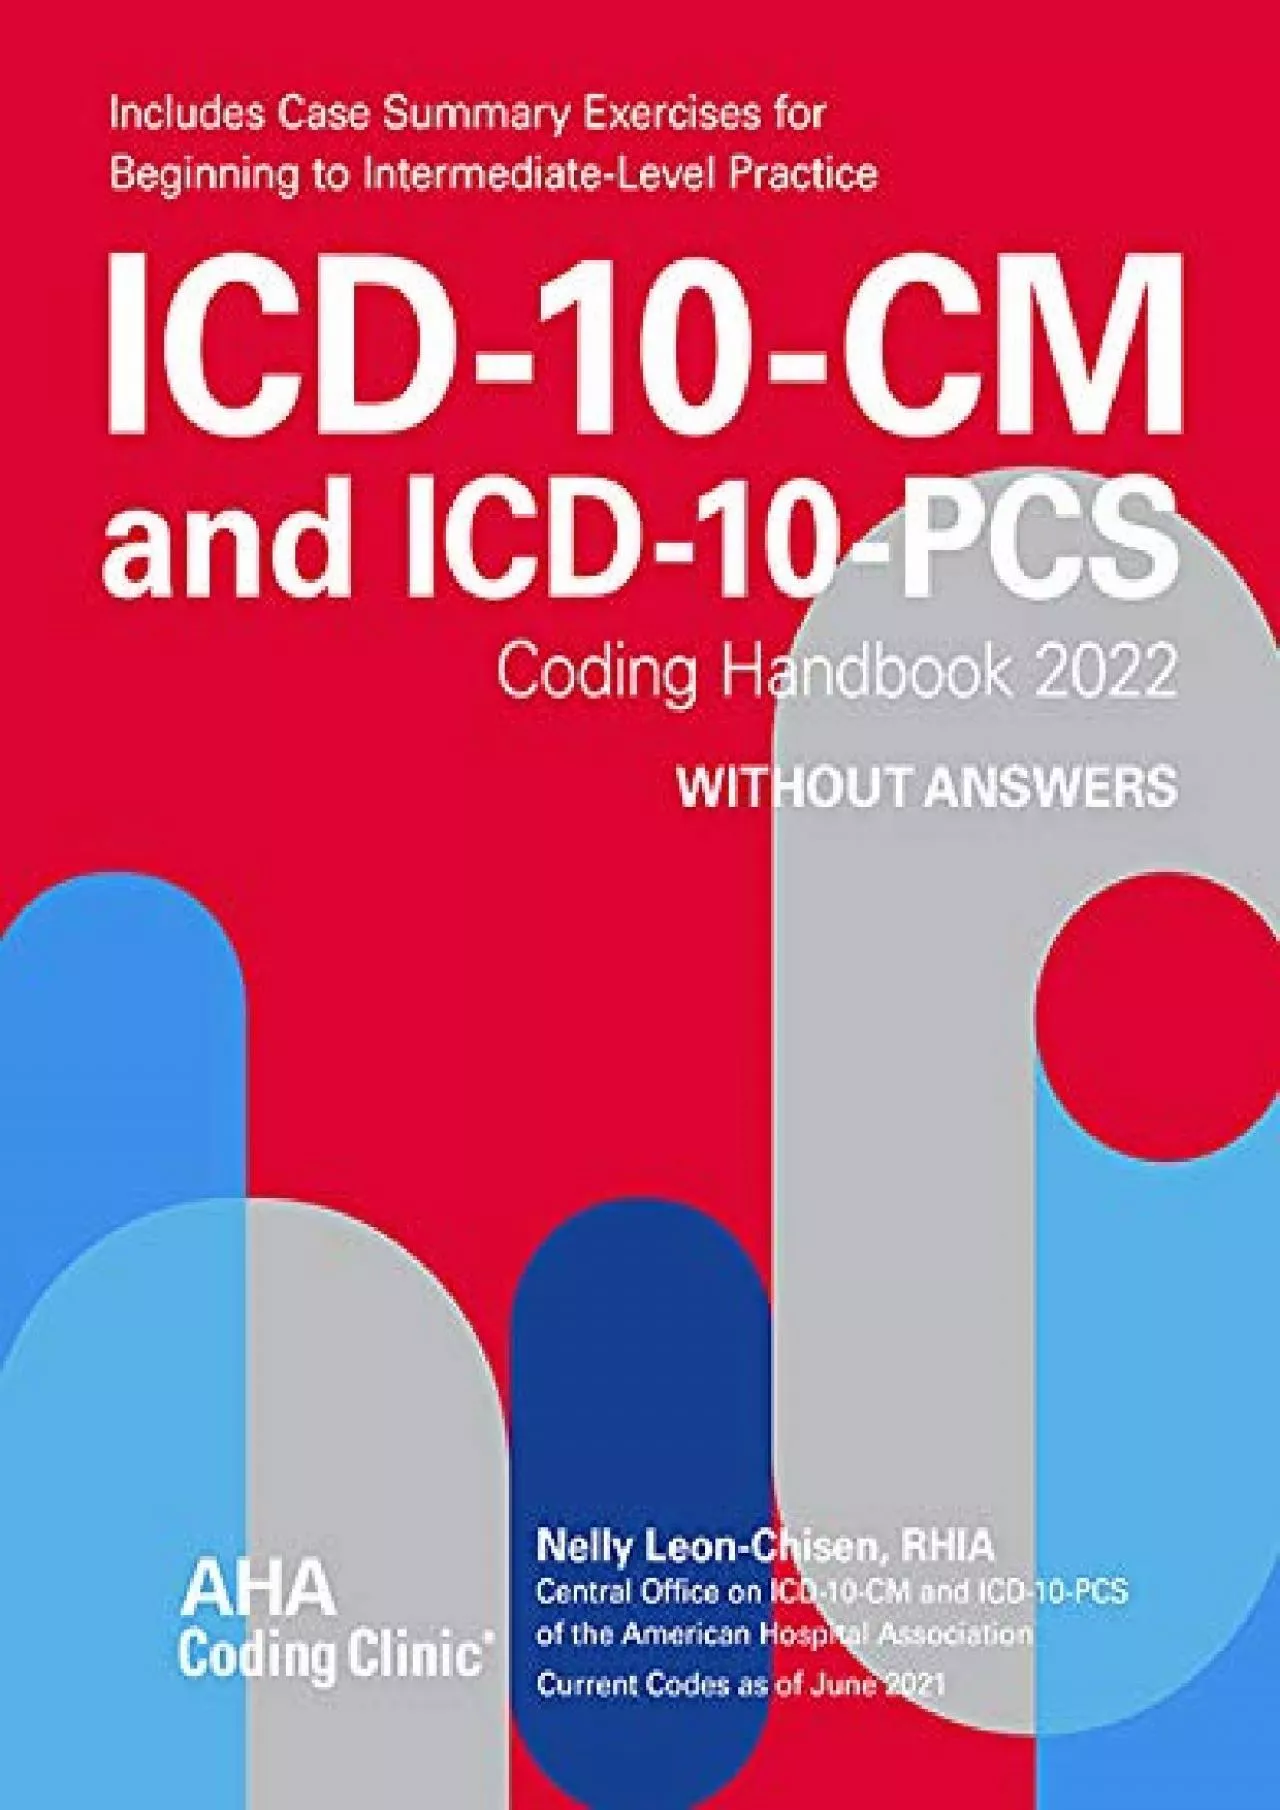 (EBOOK)-ICD-10-CM and ICD-10-PCS Coding Handbook, without Answers, 2022 Rev. Ed.